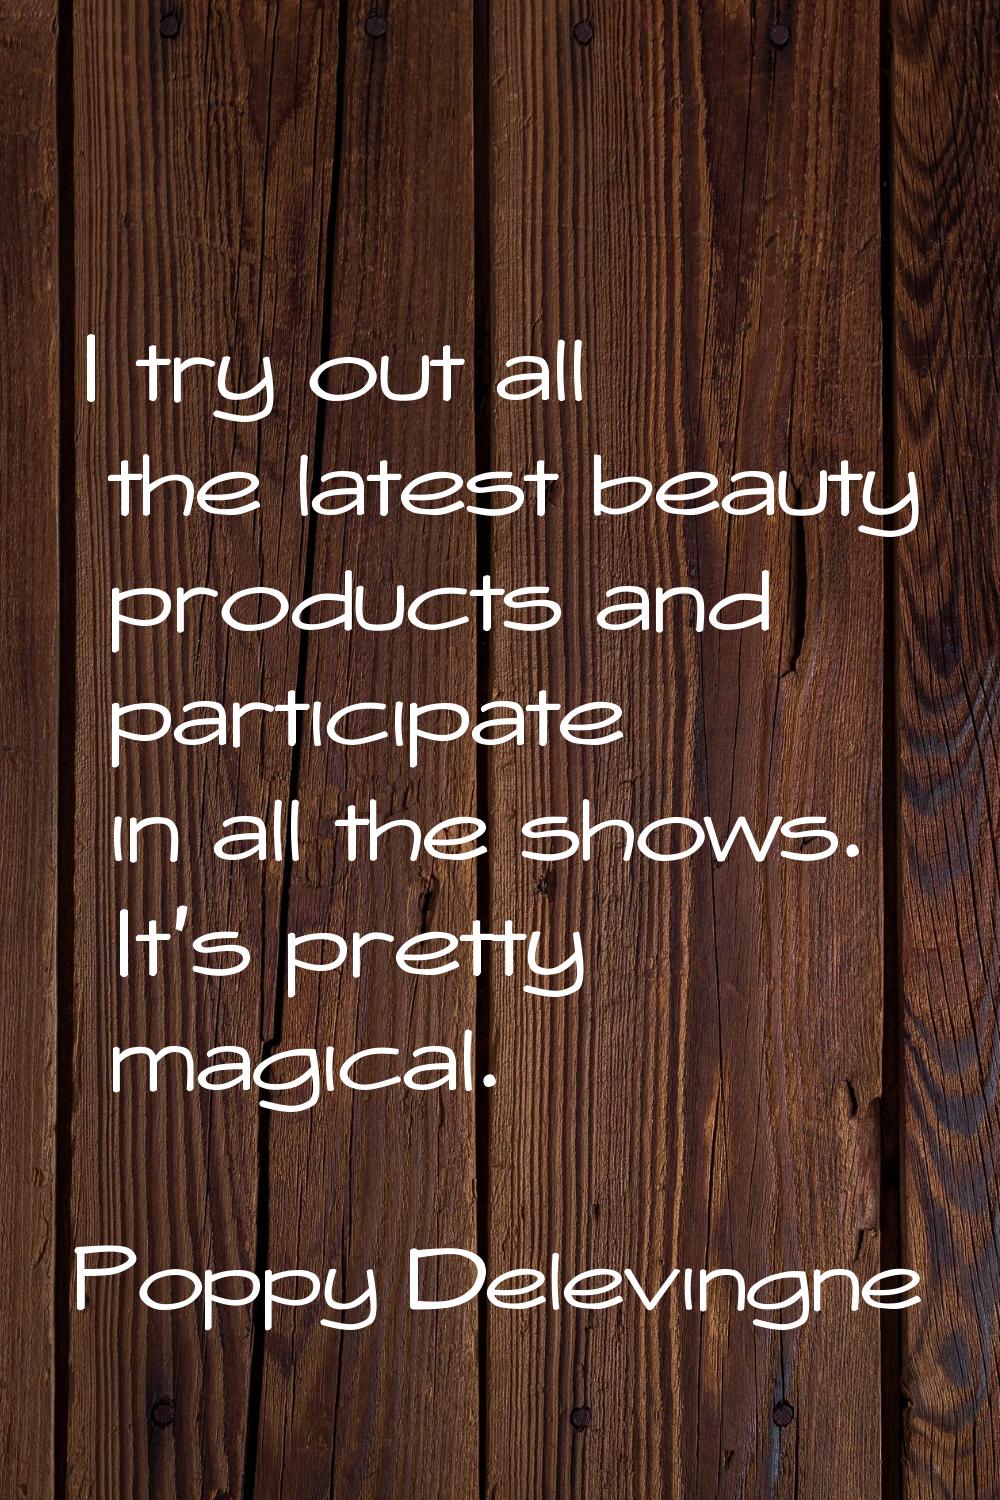 I try out all the latest beauty products and participate in all the shows. It's pretty magical.